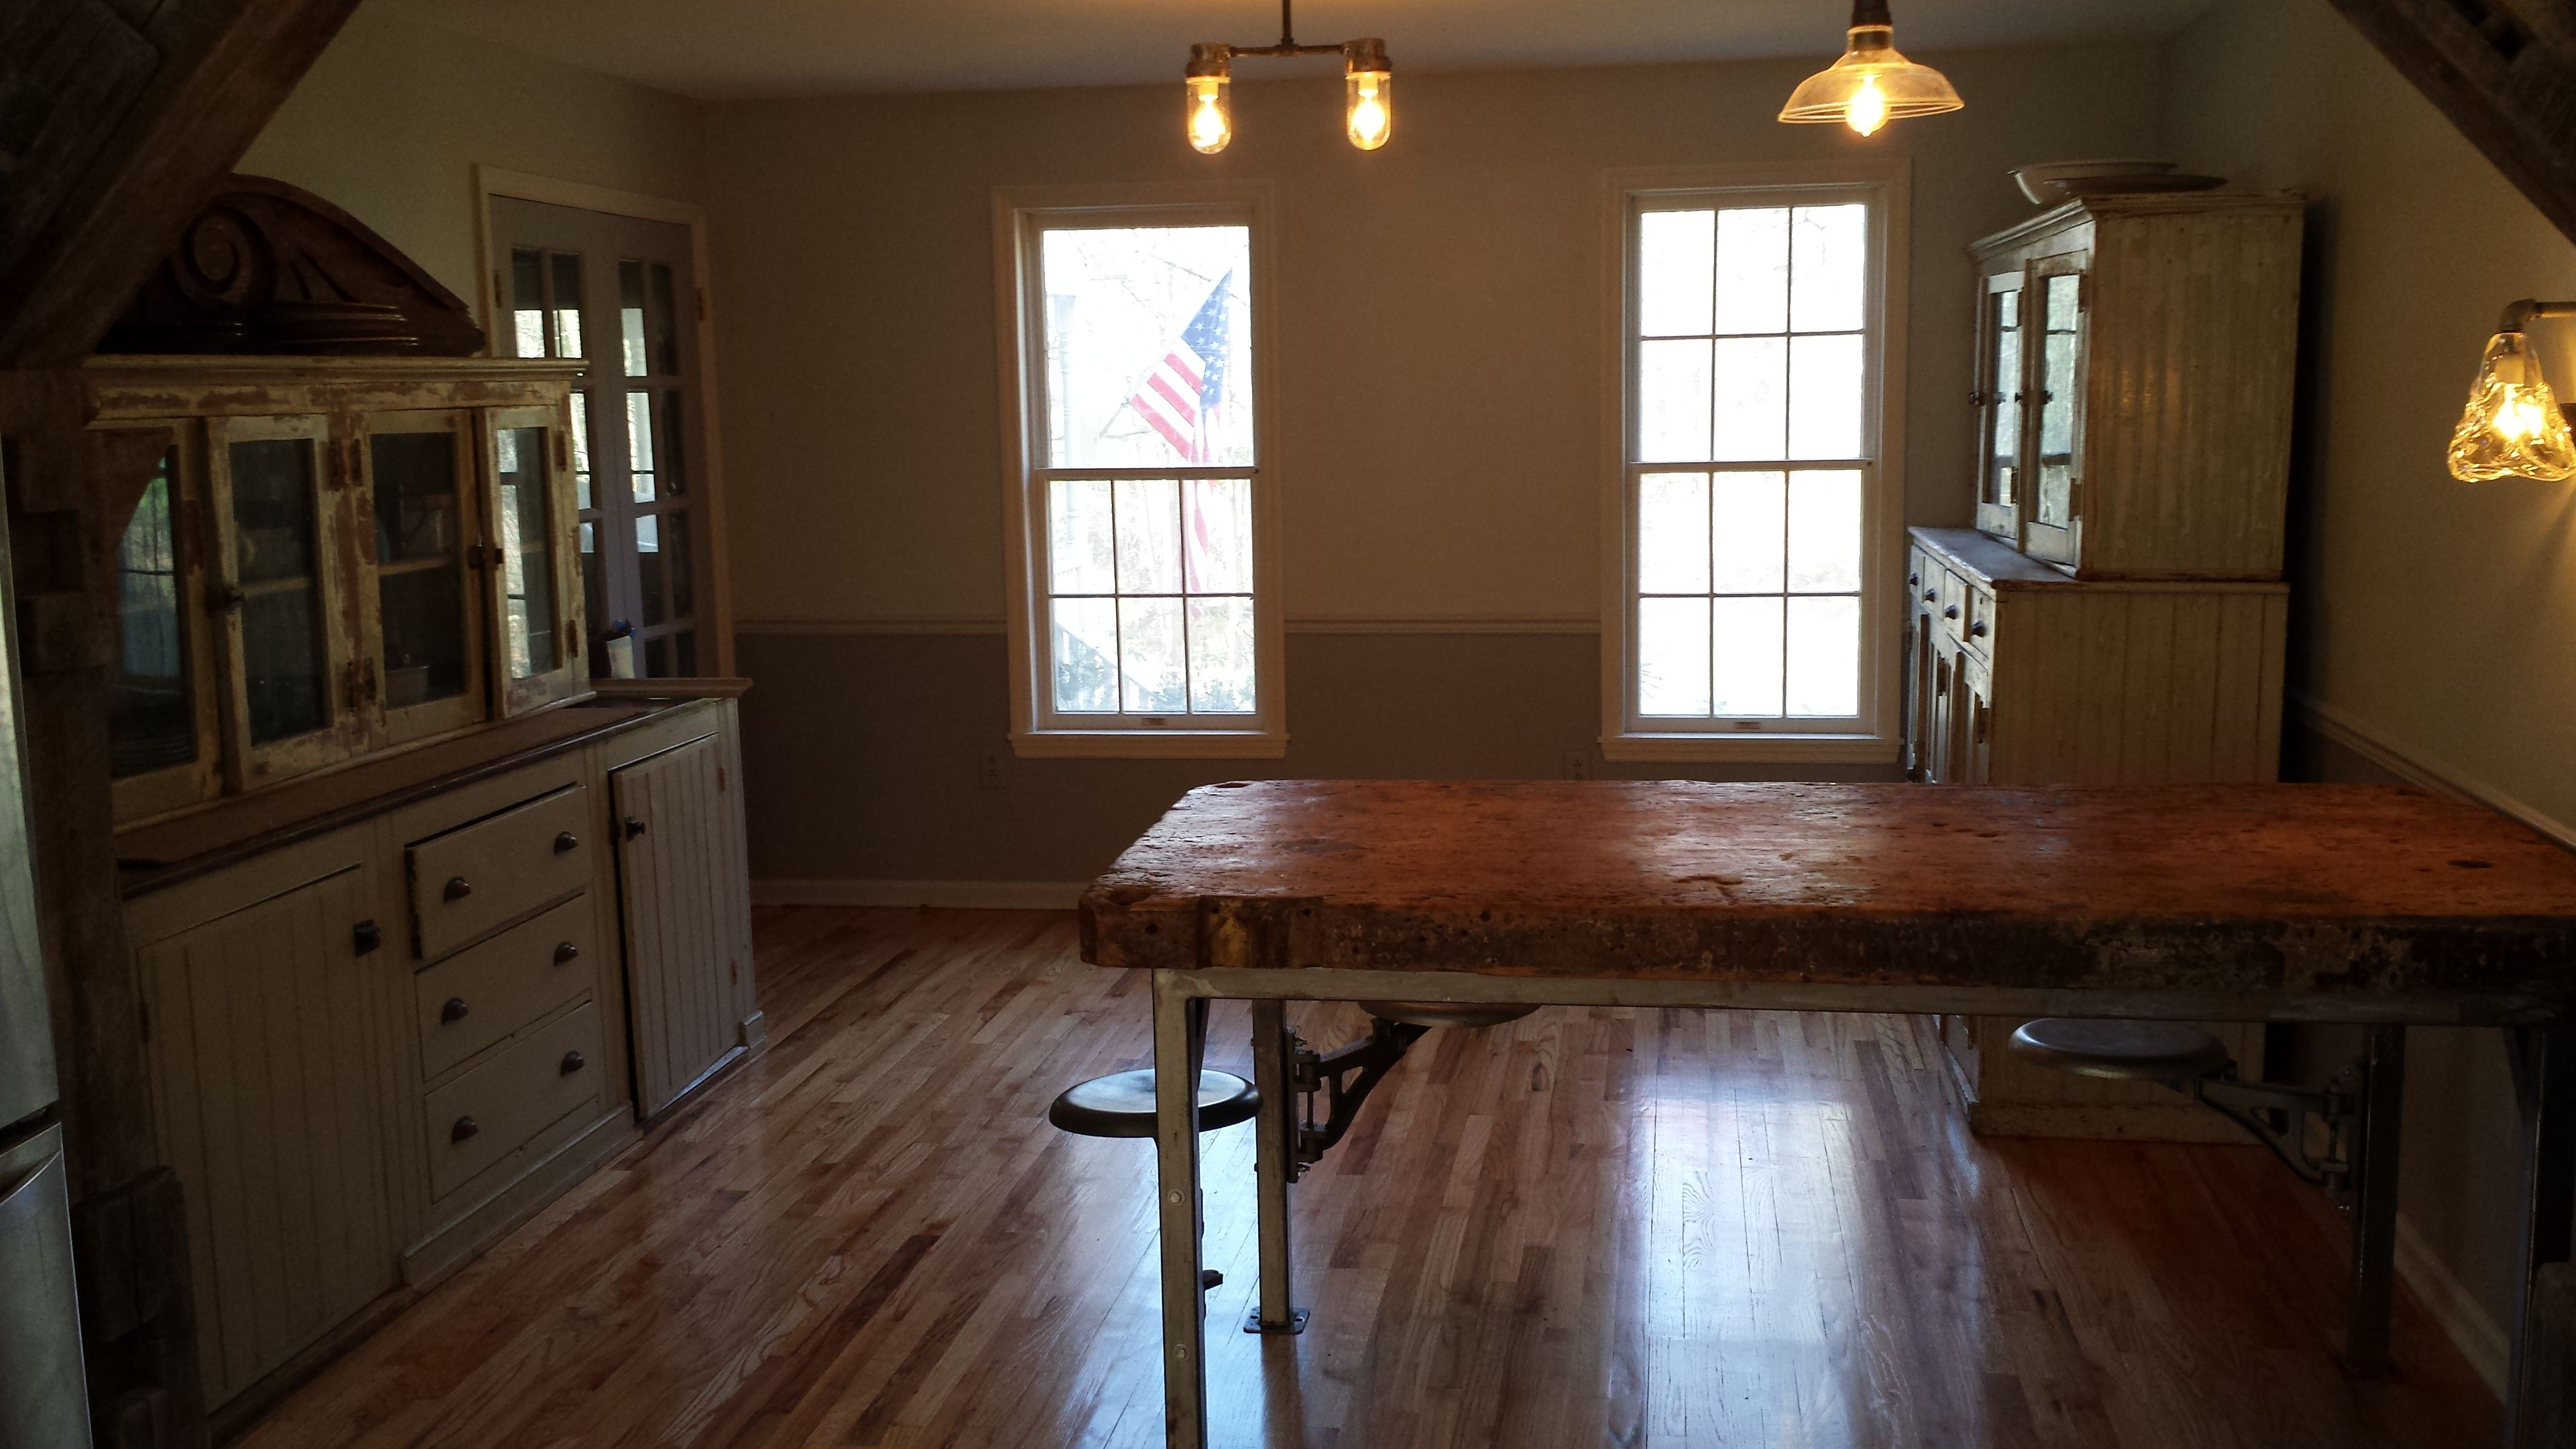 16 Fabulous Hardwood Flooring New Haven Ct 2024 free download hardwood flooring new haven ct of kitchen dining bar table with attached stool seating decor ideas inside kitchen dining bar table with attached stool seating